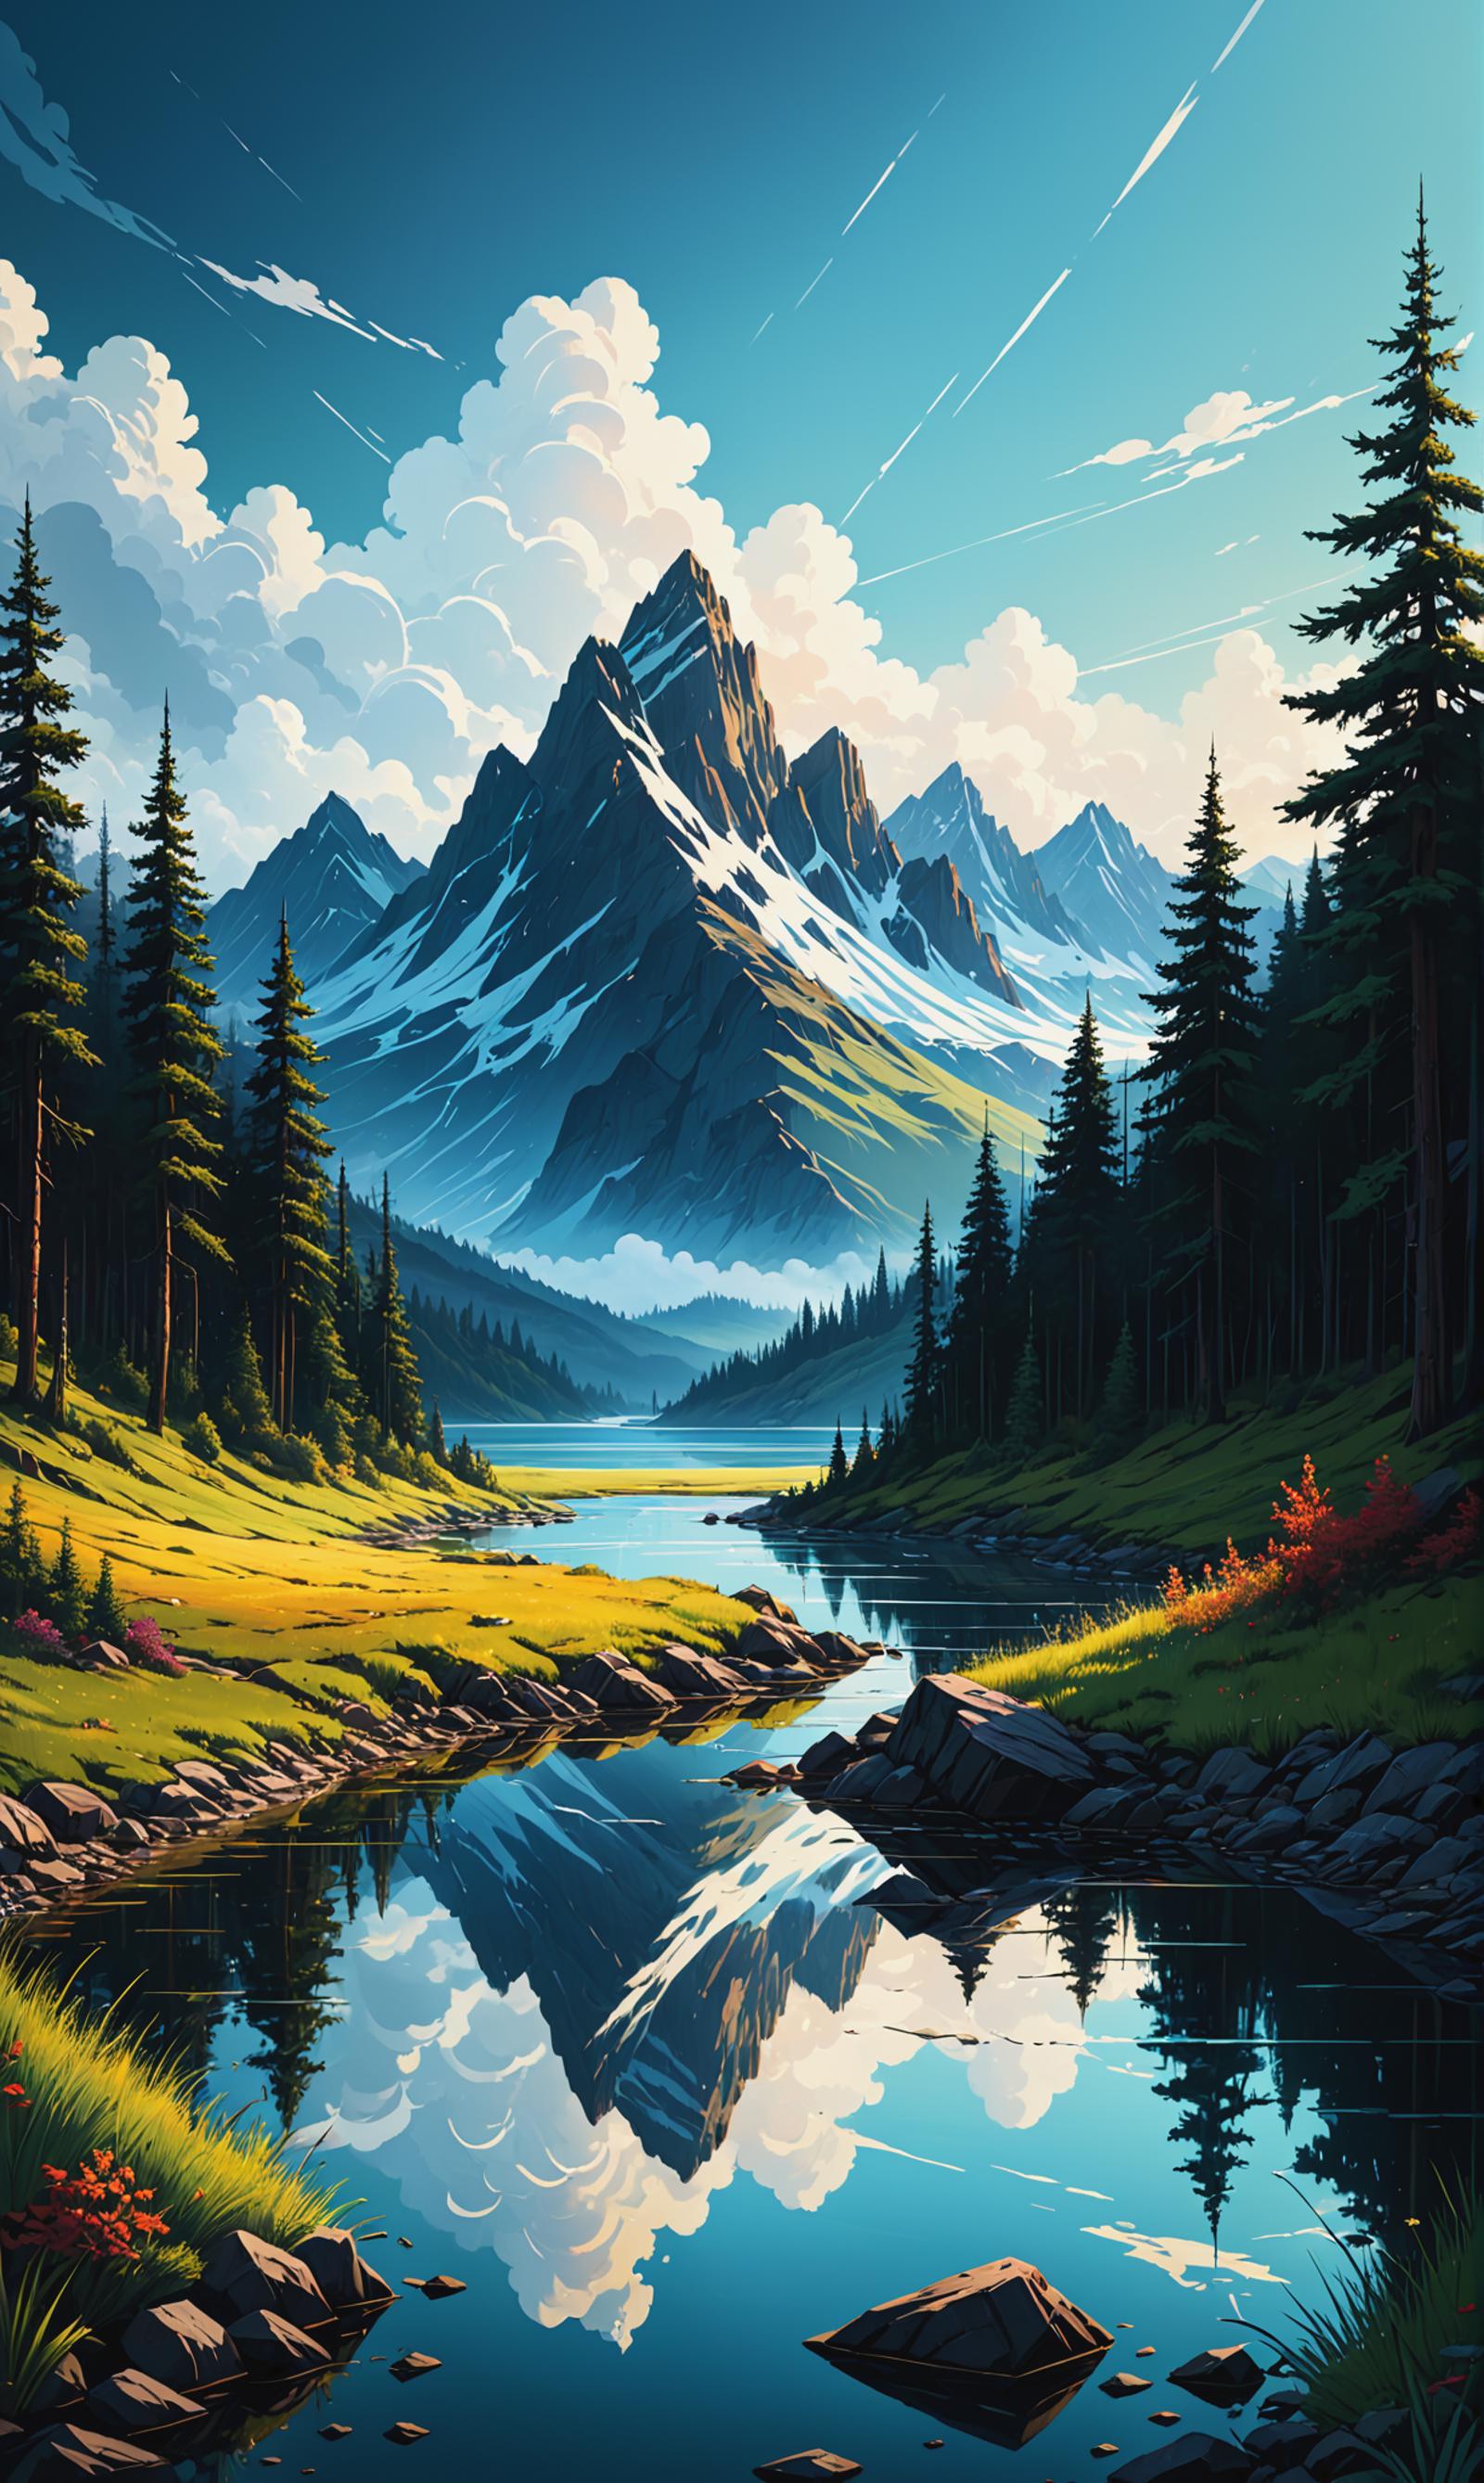 A serene mountain landscape with a lake and lush trees.